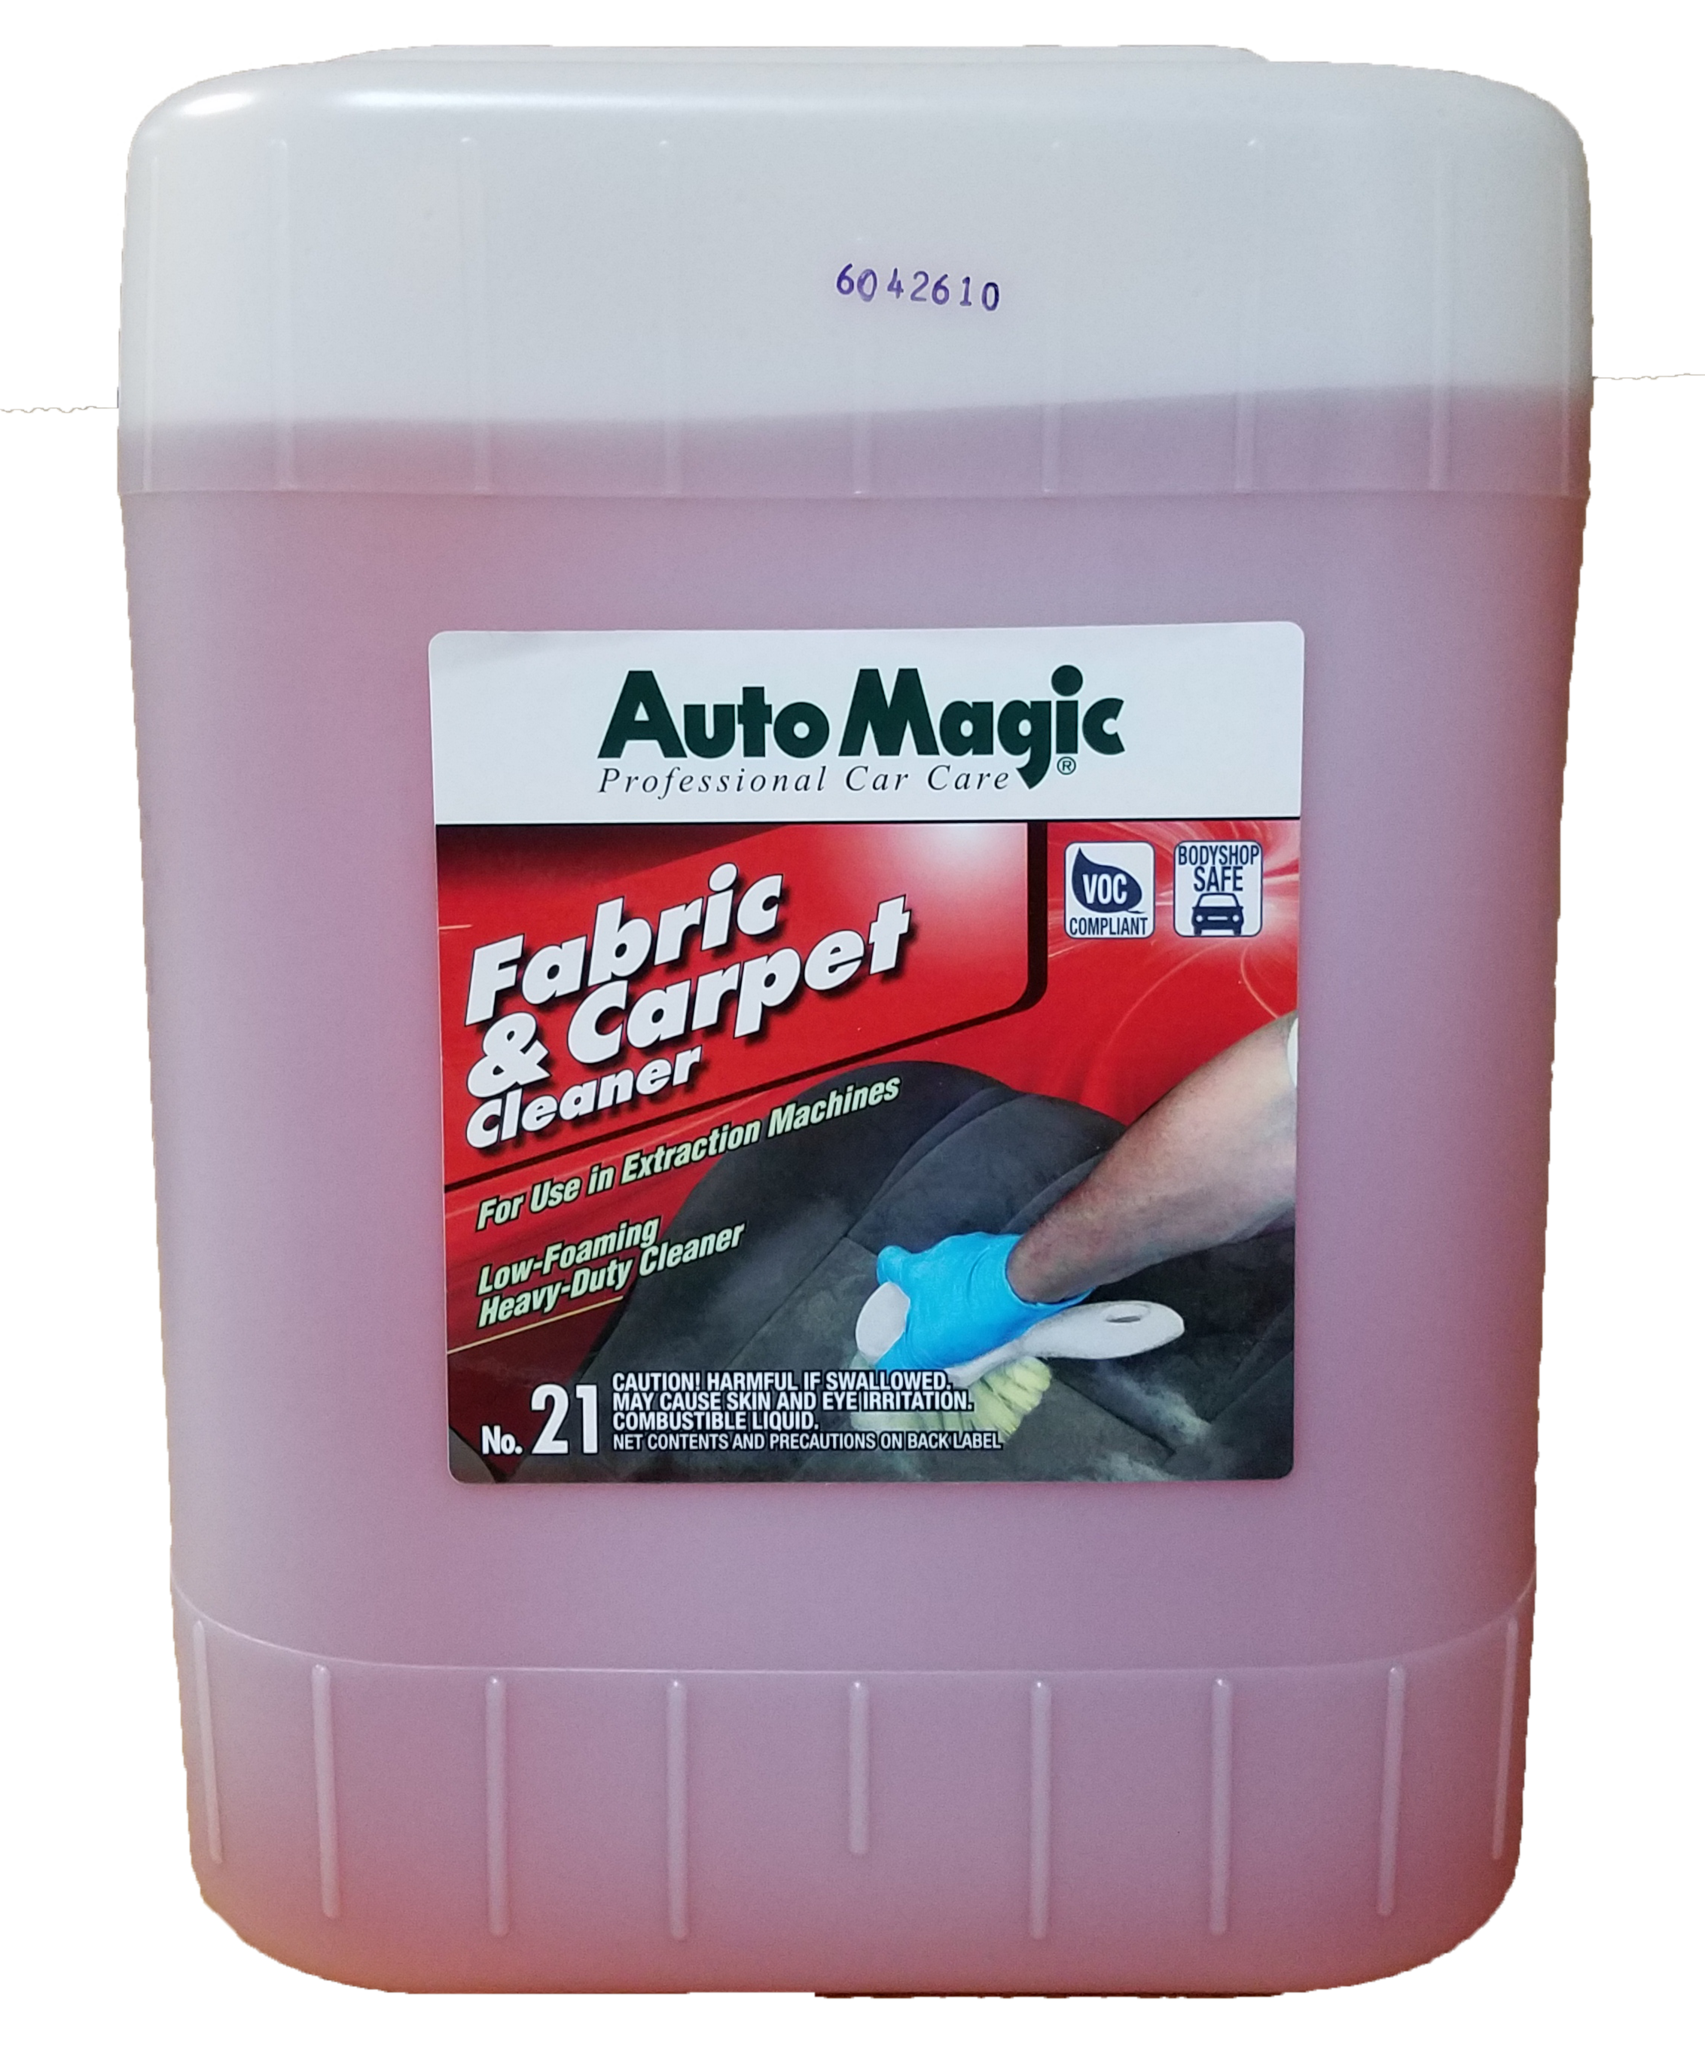  Auto Magic Fabric & Carpet Cleaner for Hot or Cold